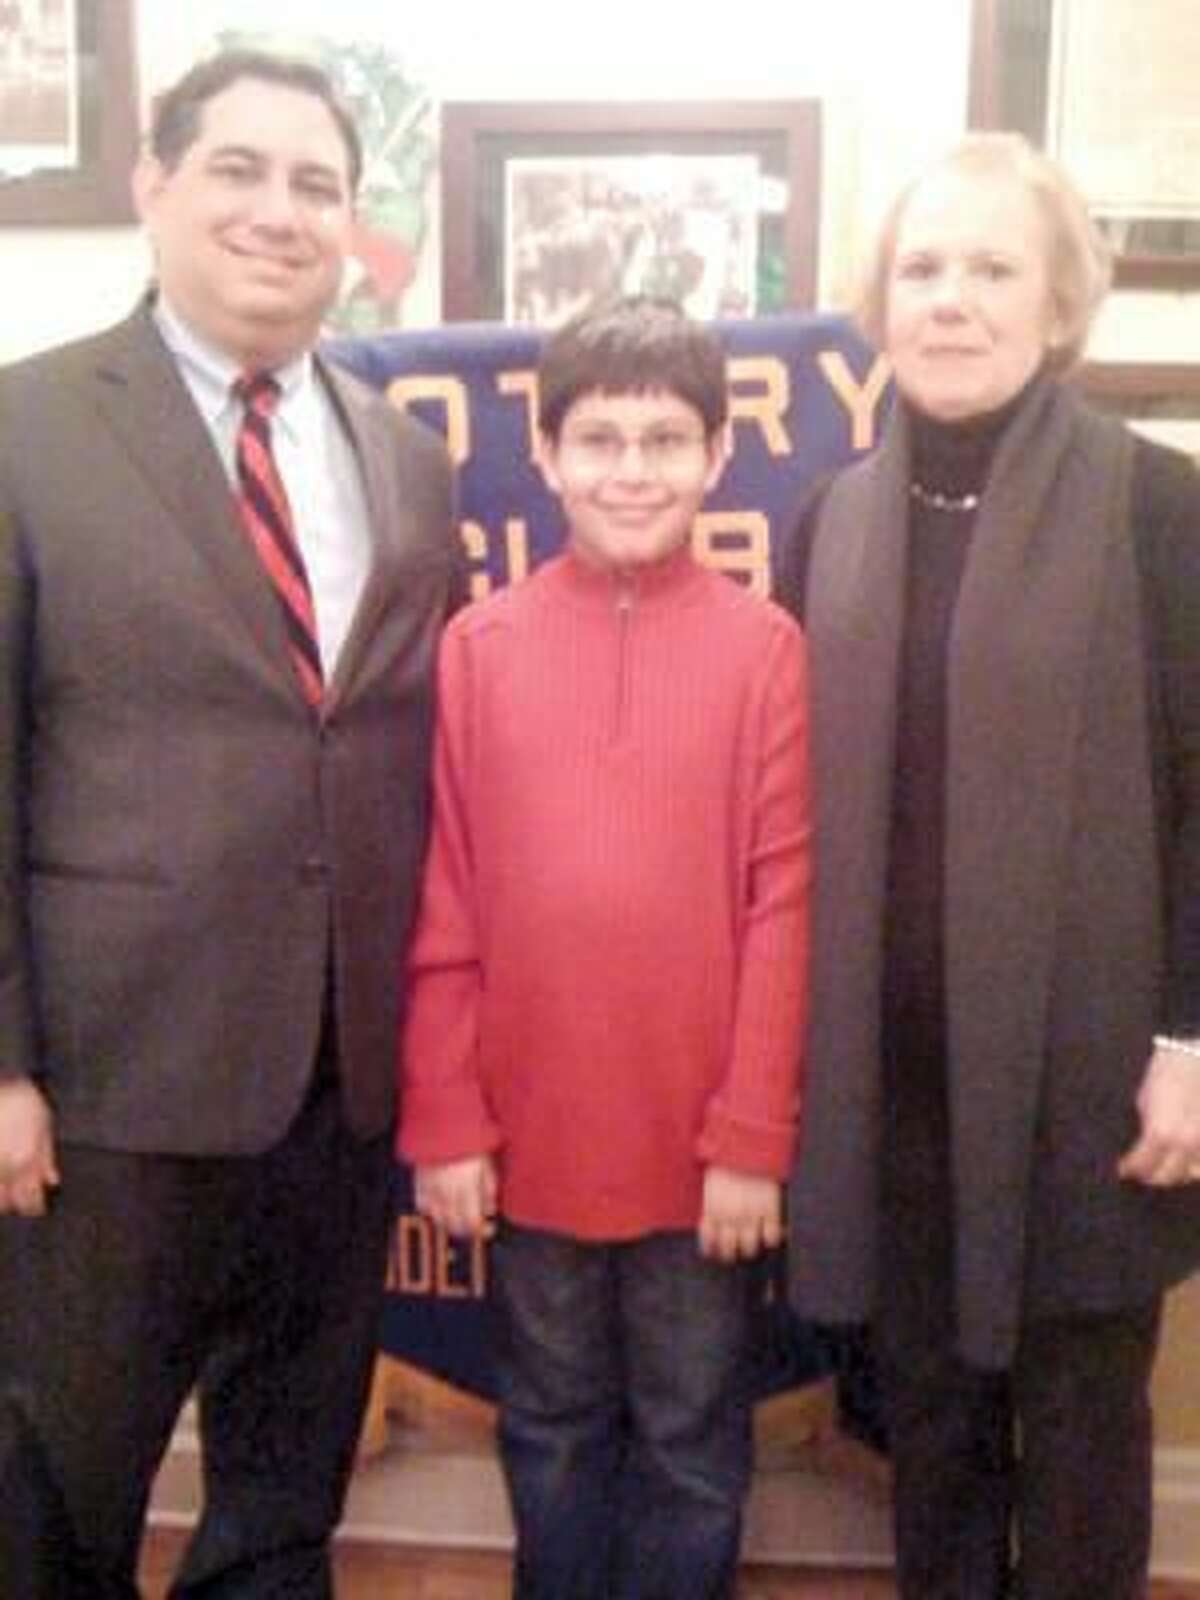 Submitted Photo The Rotary Club of Hamden named Panth Doshi its Student of the Month for March 2010. Panth is shown here with his teacher, Marcia Proto, and school principal Chris Mellillo.